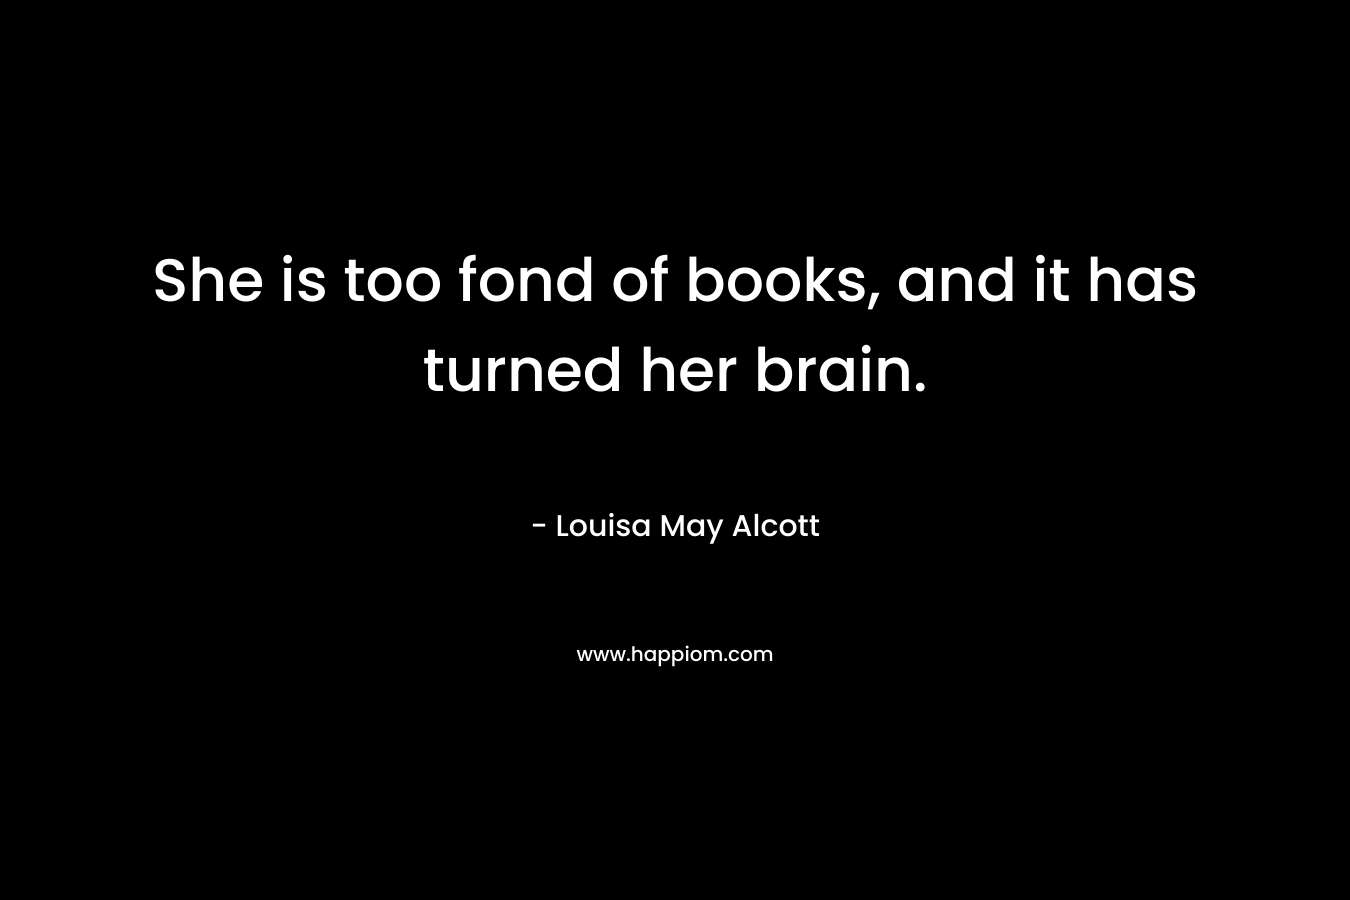 She is too fond of books, and it has turned her brain.